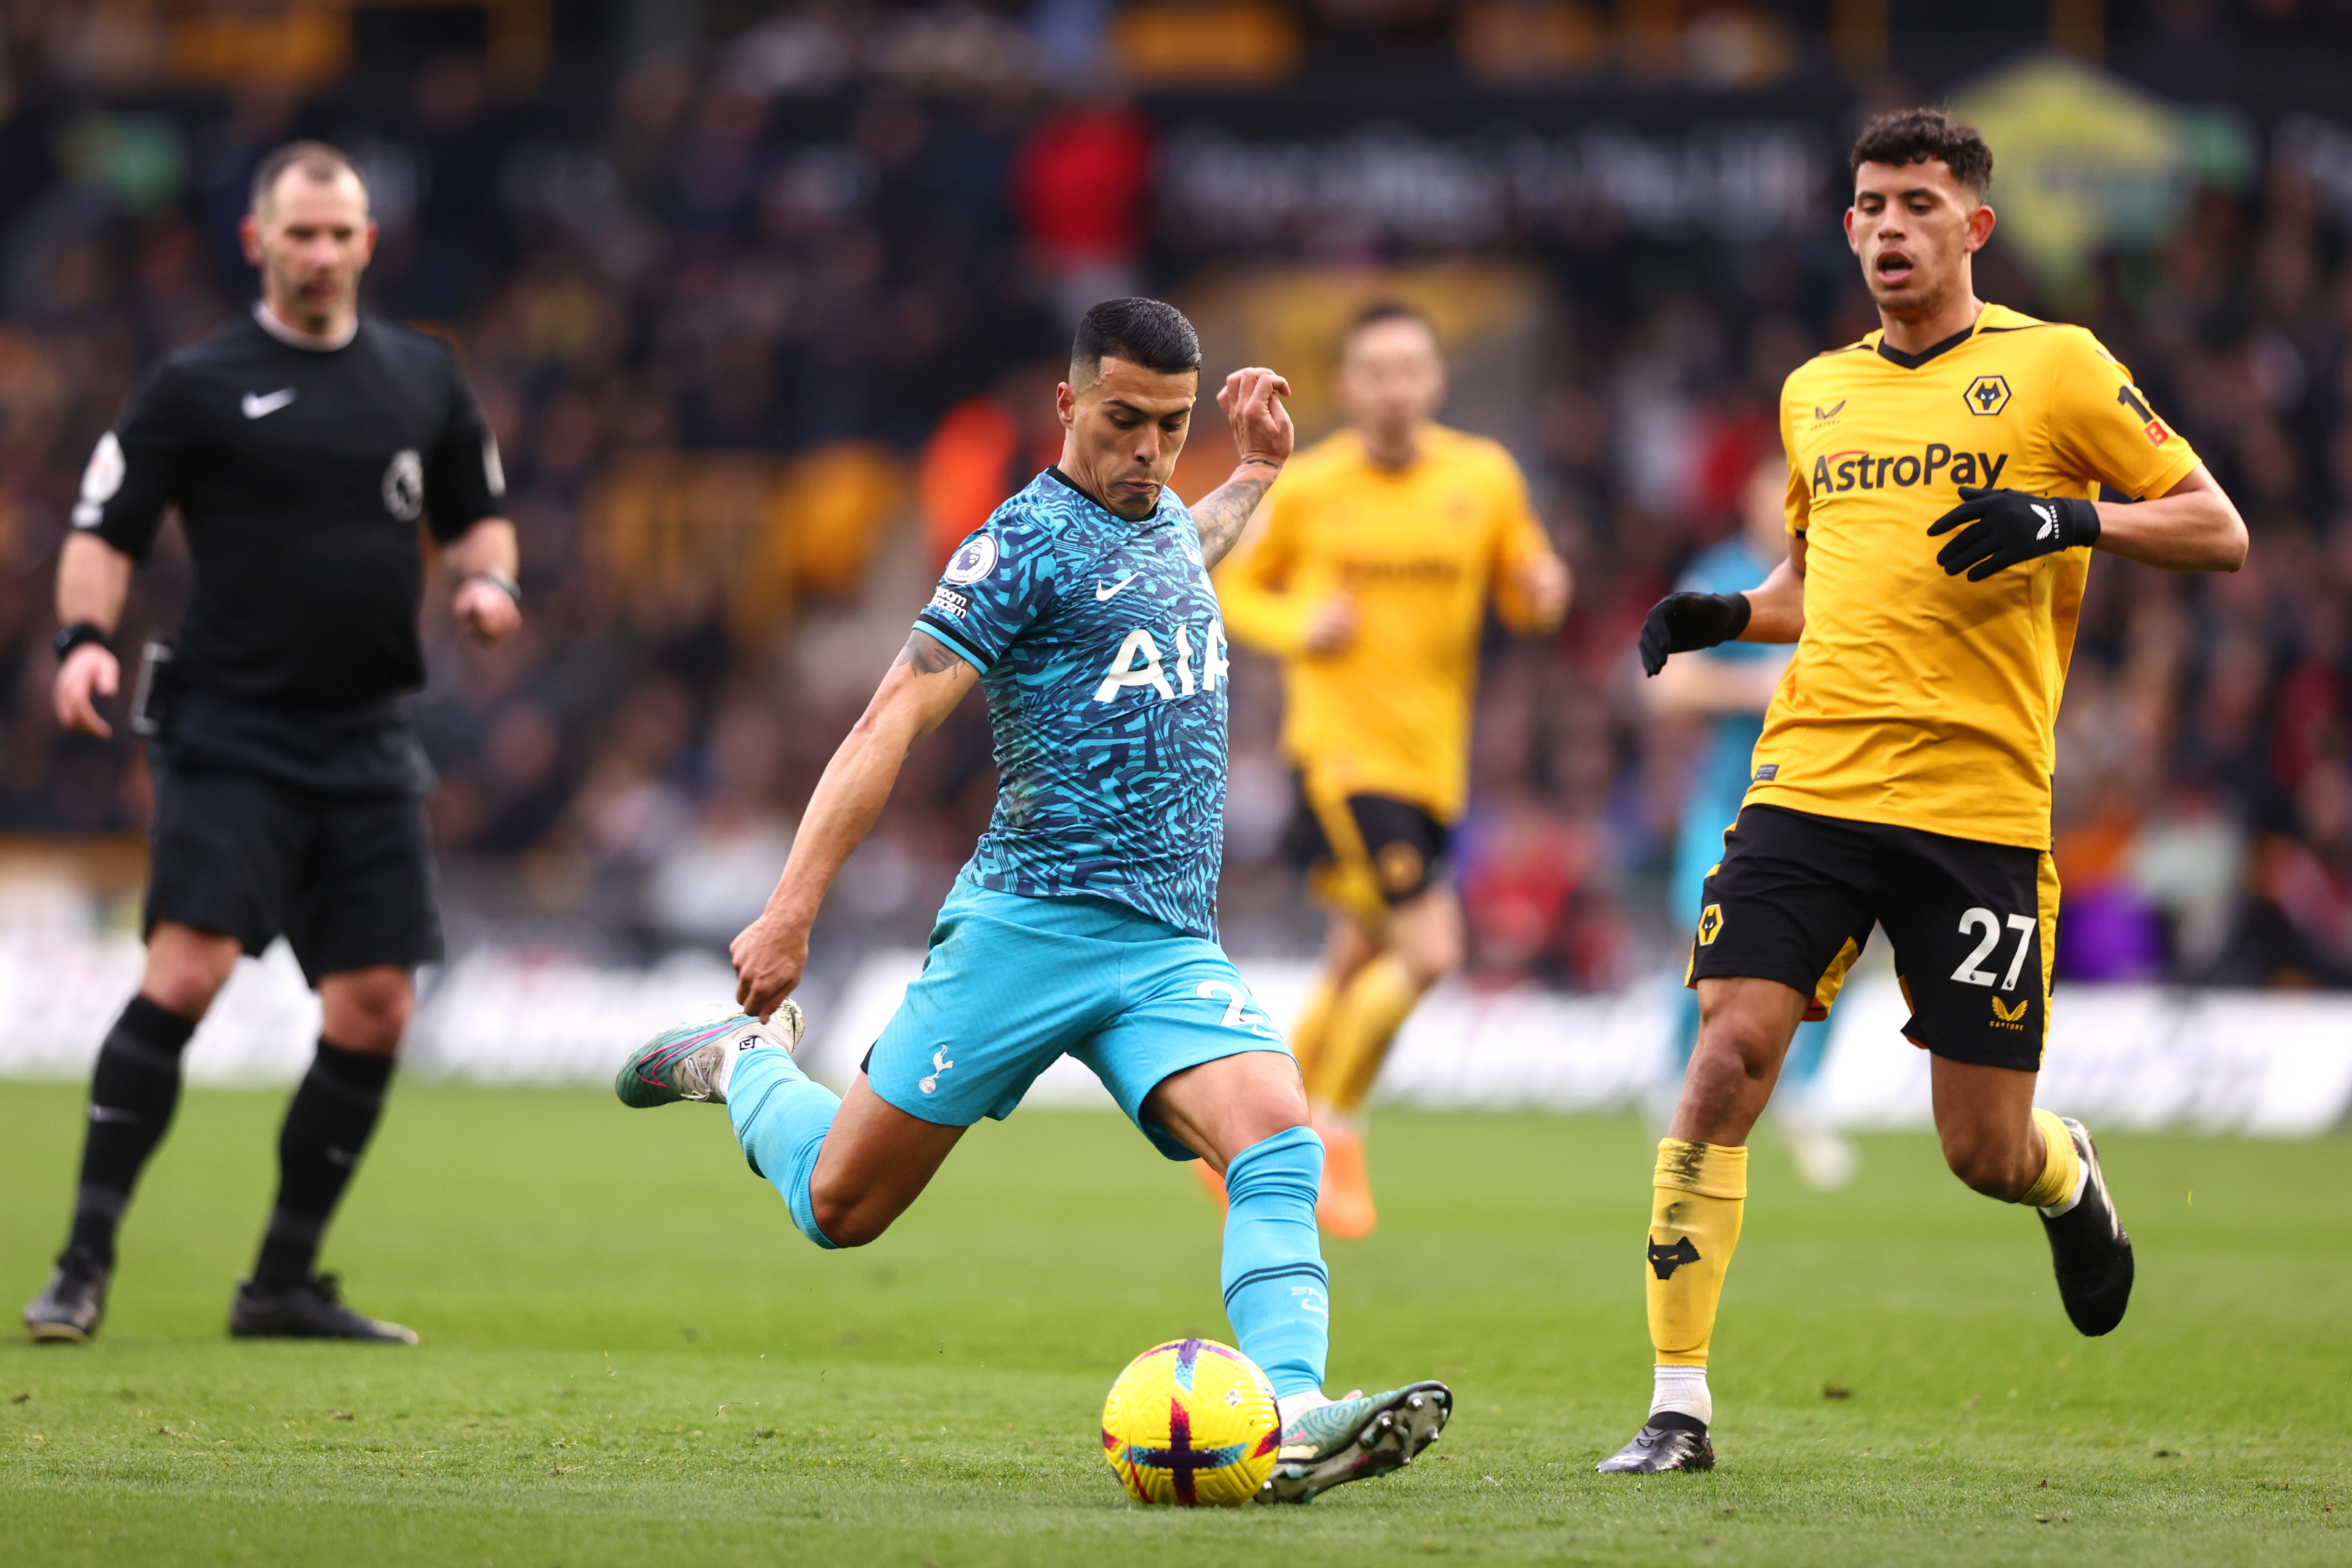 Tottenham Hotspur rue missed chances in 1-0 defeat at Wolves